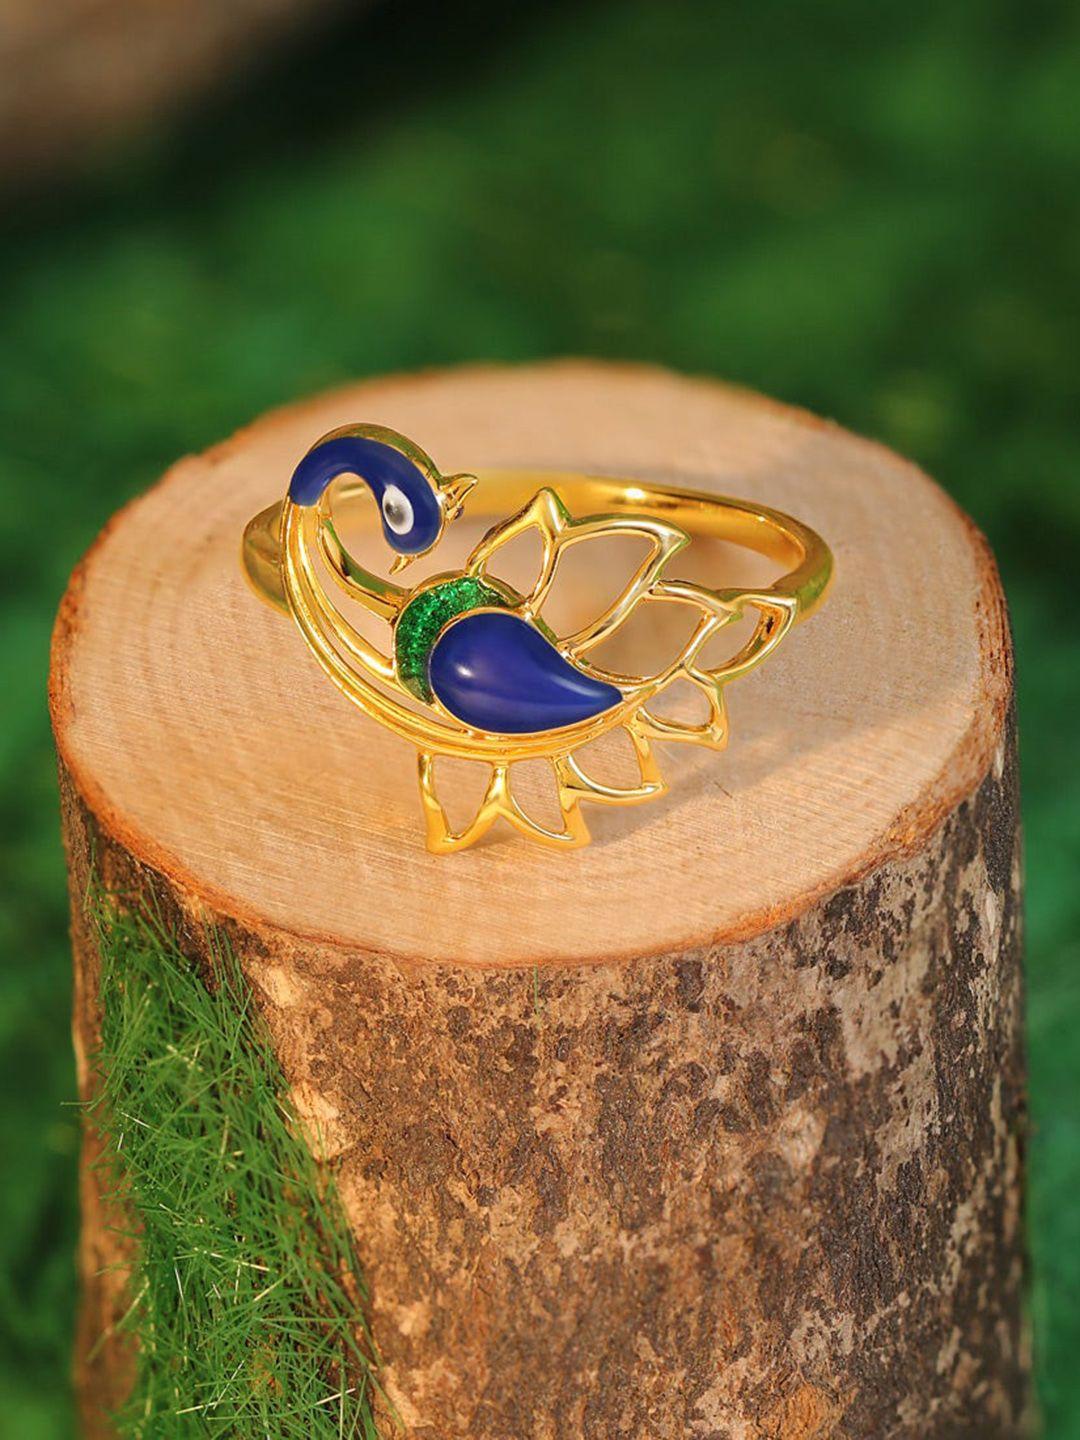 candere a kalyan jewellers company peacock 14kt bis hallmark gold ring-2.1gm